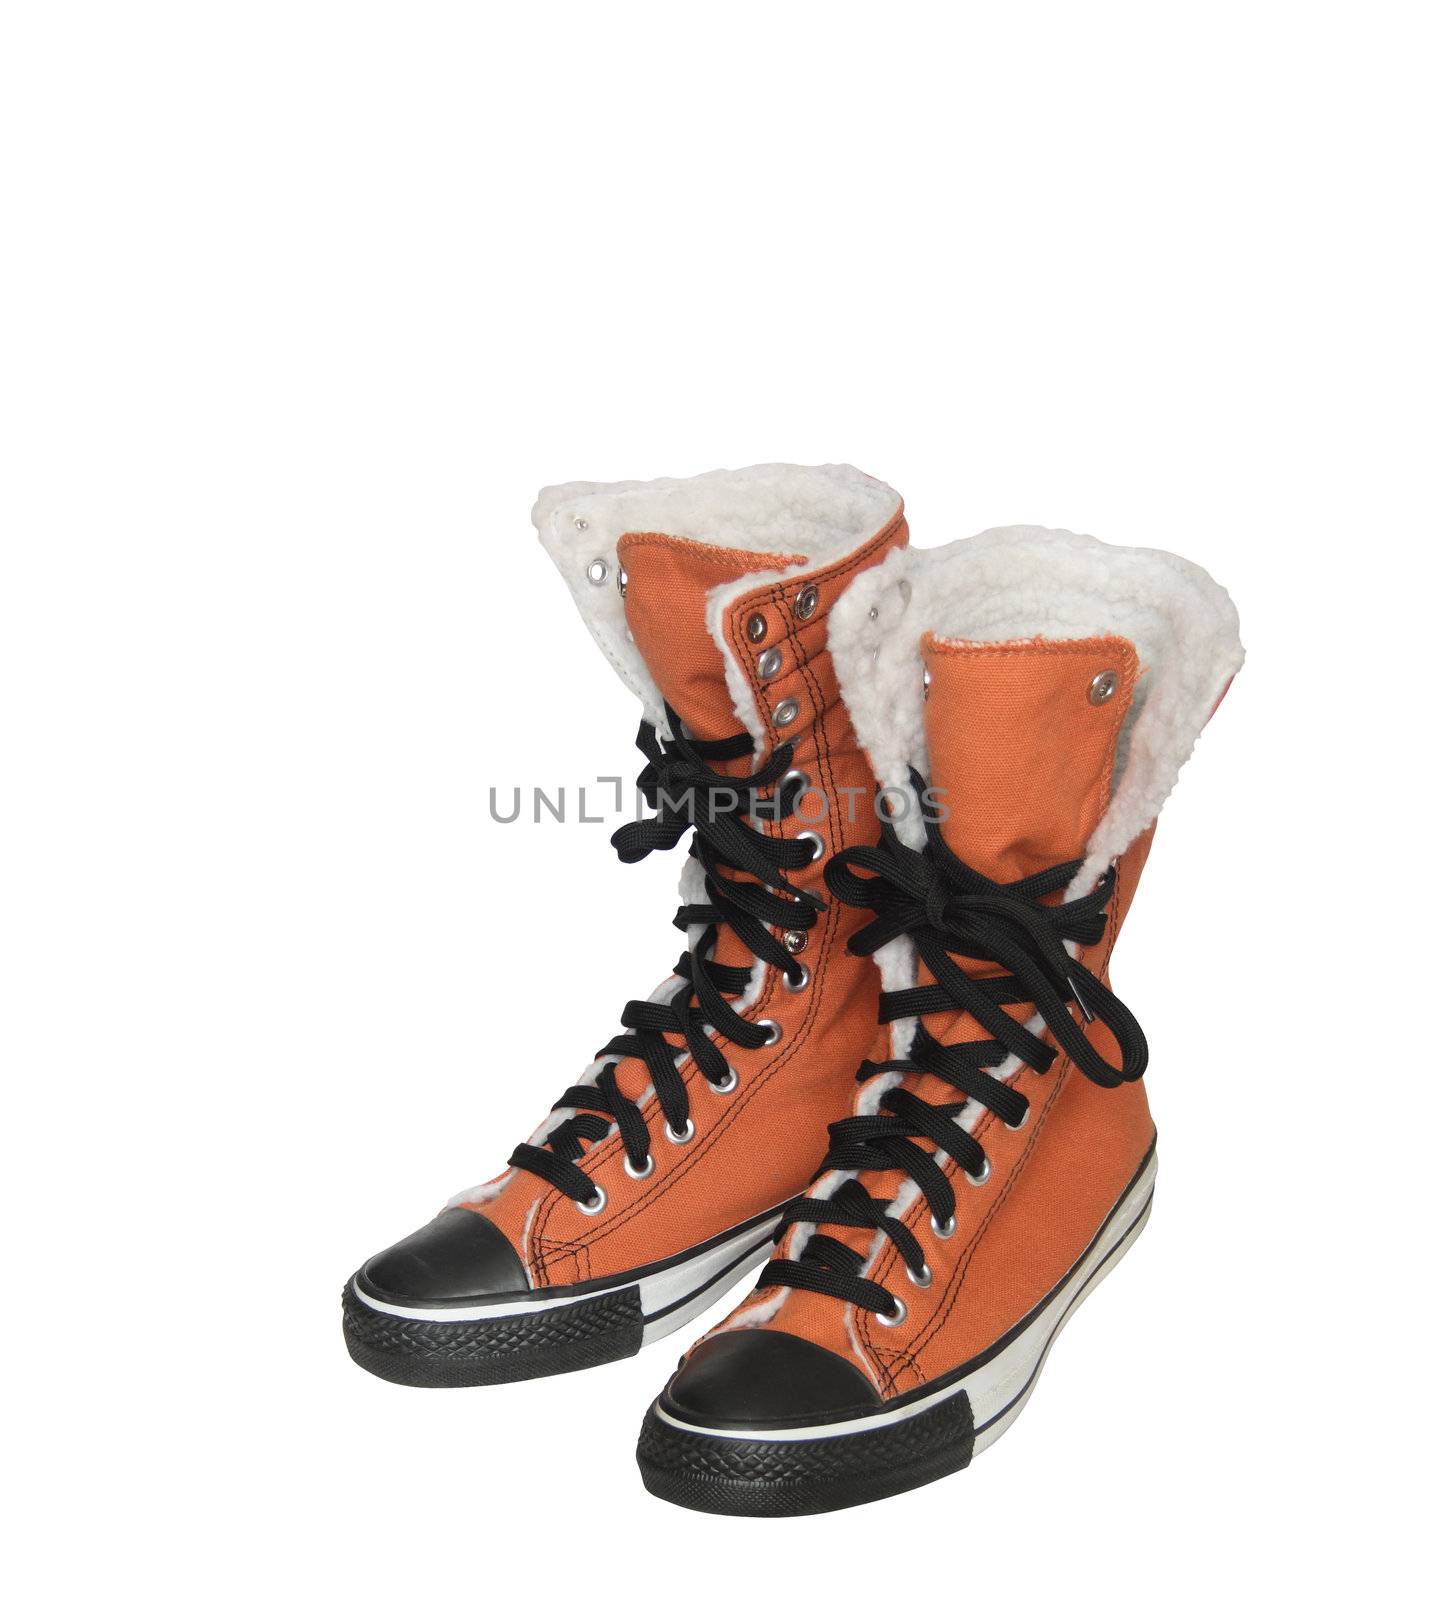 Modern ginger winter sneakers isolated on white background with clipping path